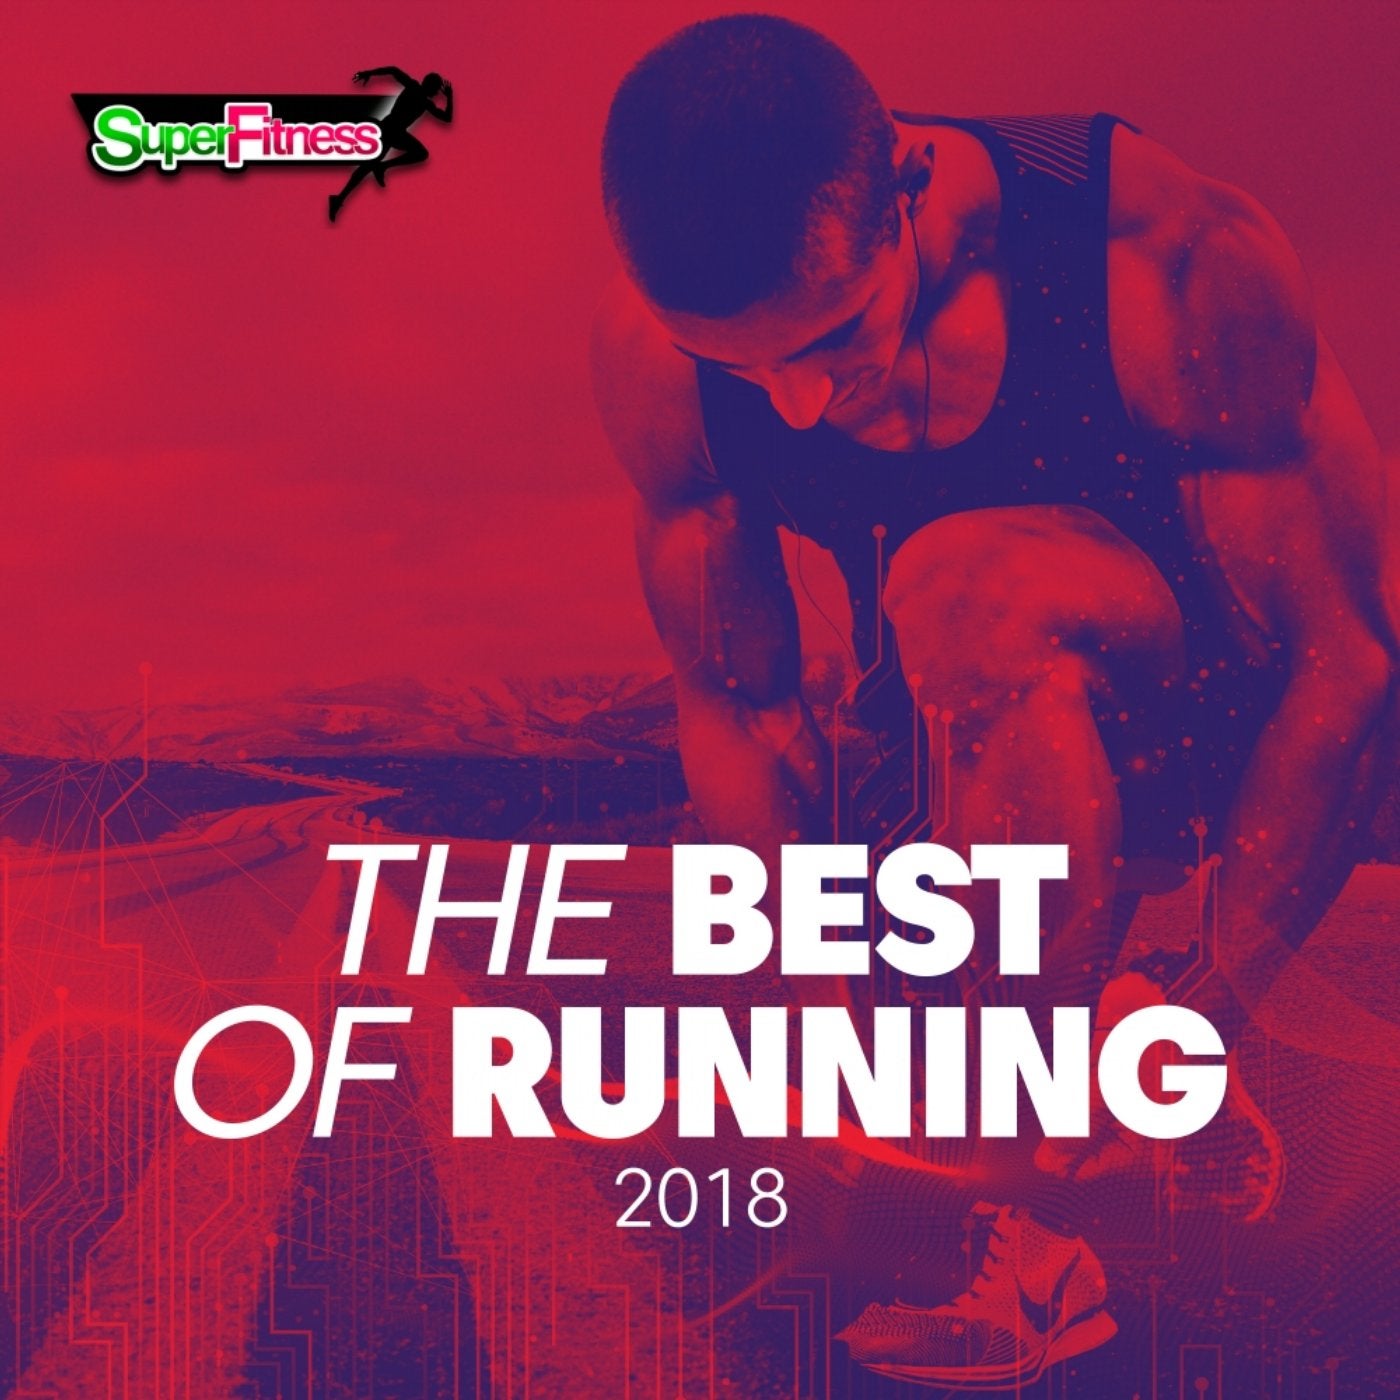 The Best of Running 2018